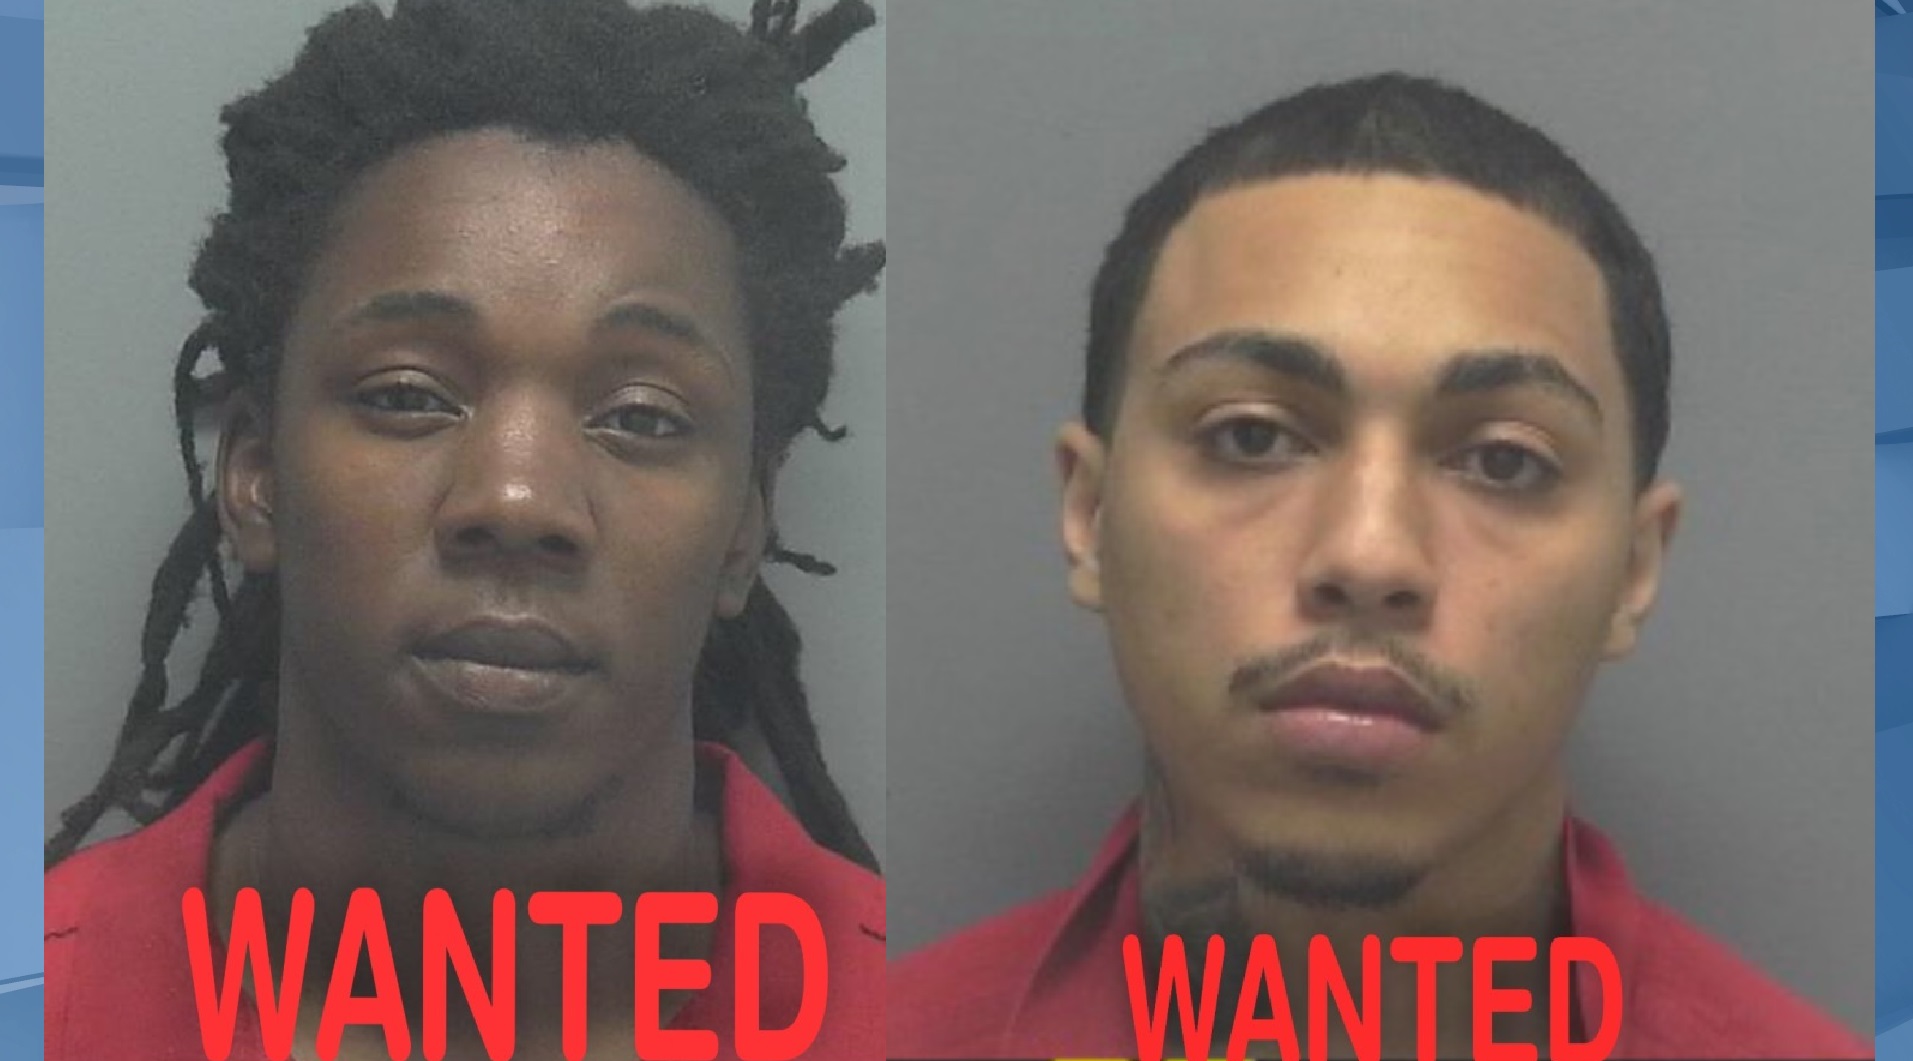 Lee County detectives make arrests in narcotics bust, more wanted